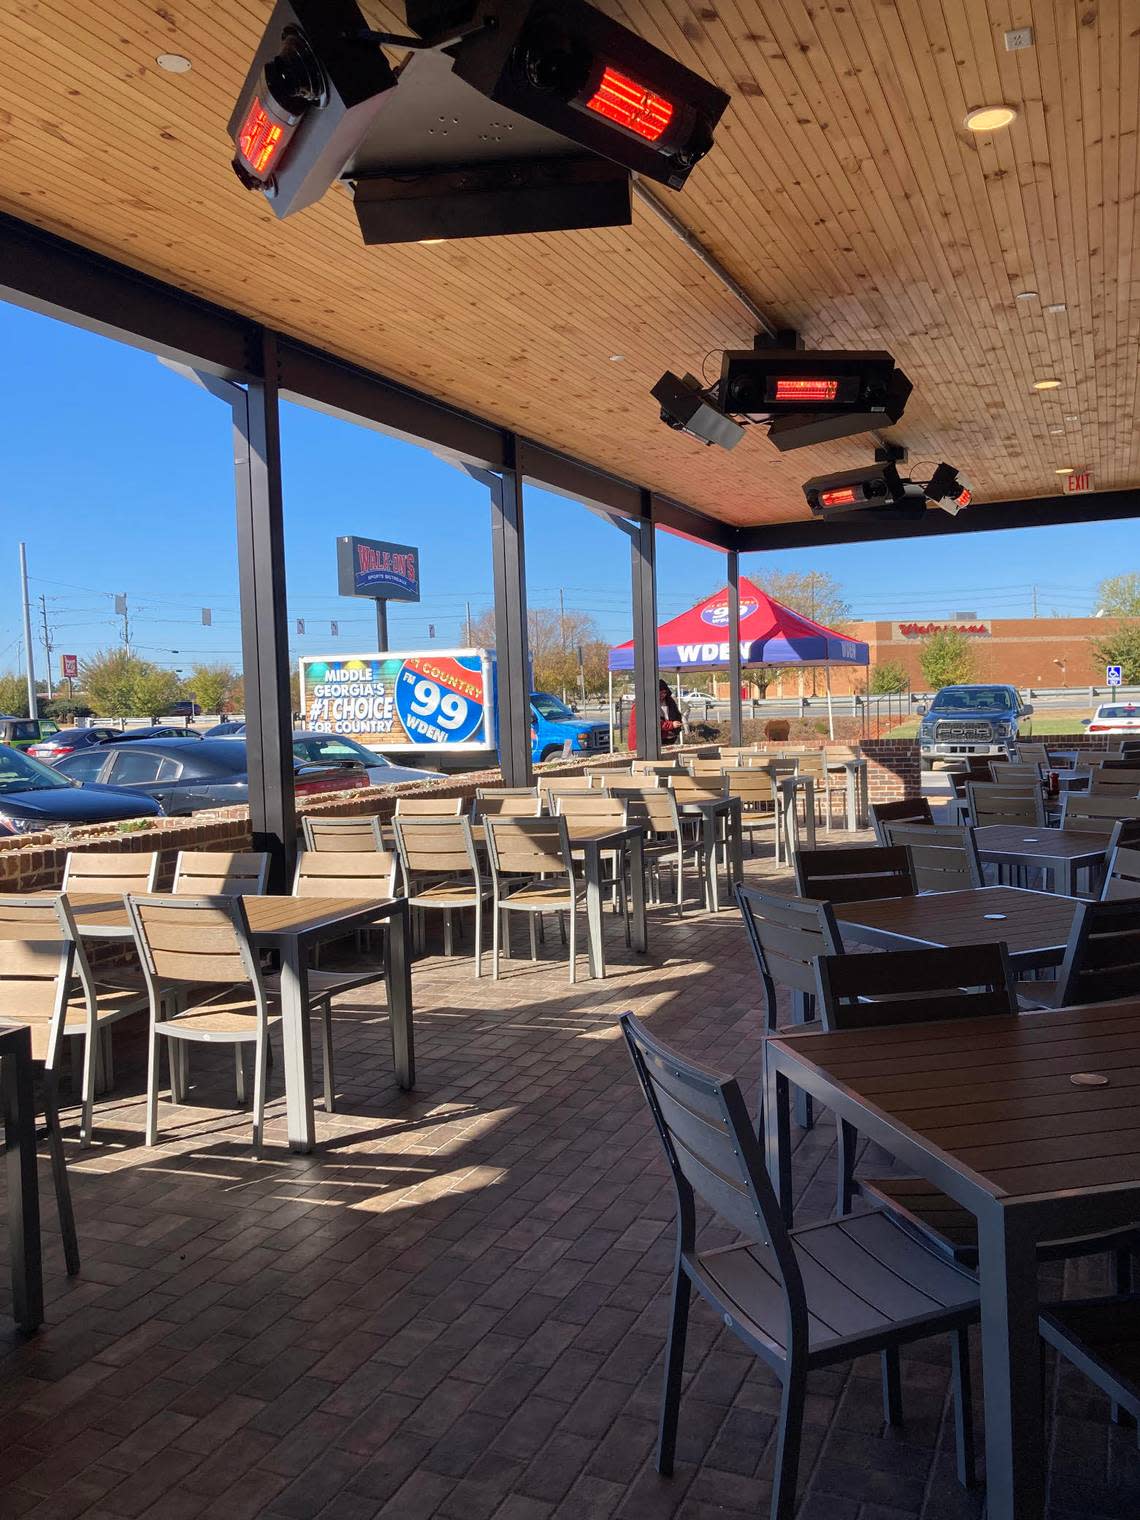 The covered patio at the new Walk-On’s Sports Bistreaux in Warner Robins can seat 50 people and has overhead warmers for the winter that double as air conditioners in the summer.